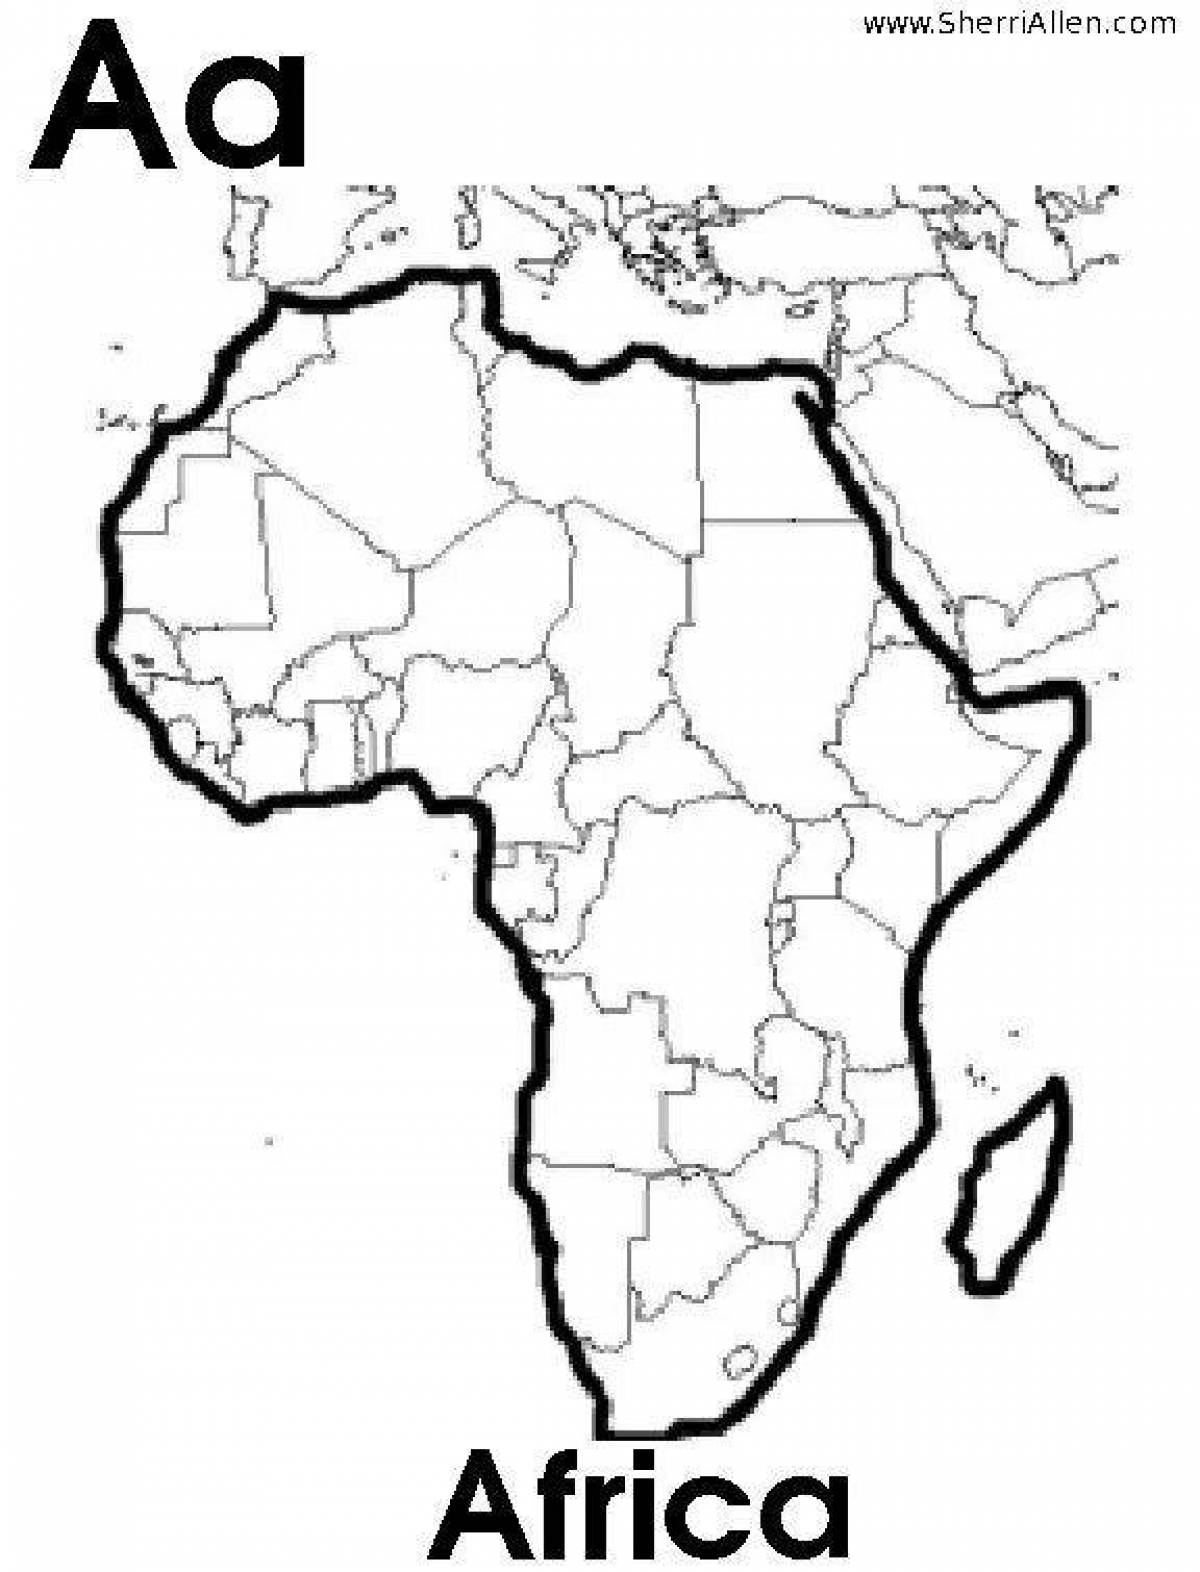 Africa shiny map coloring book